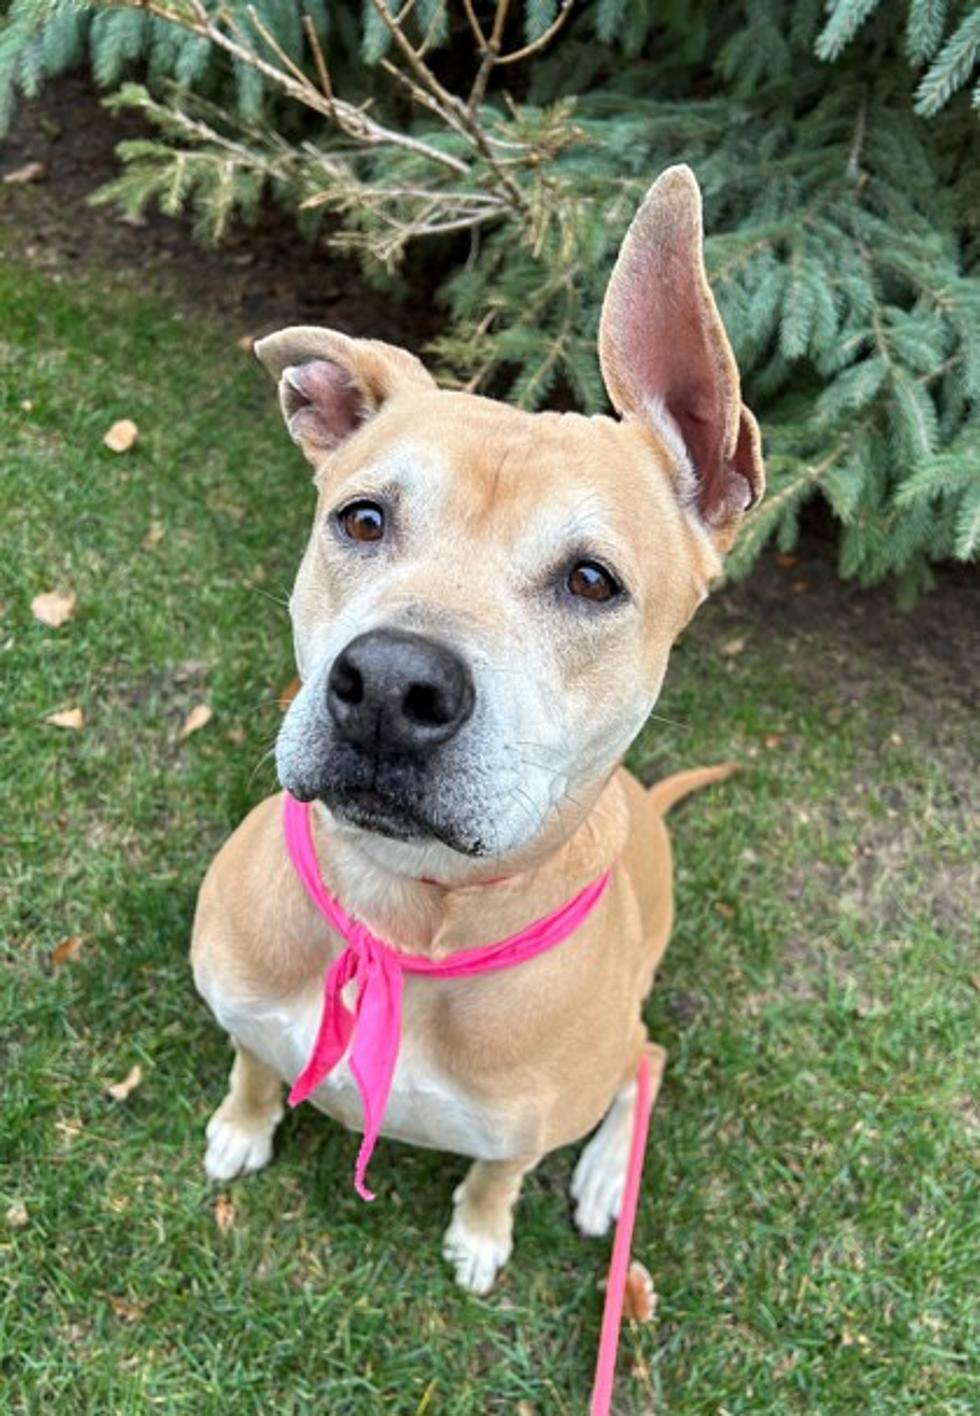 Our Adoptable Pet of the Week: Meet Lacey!